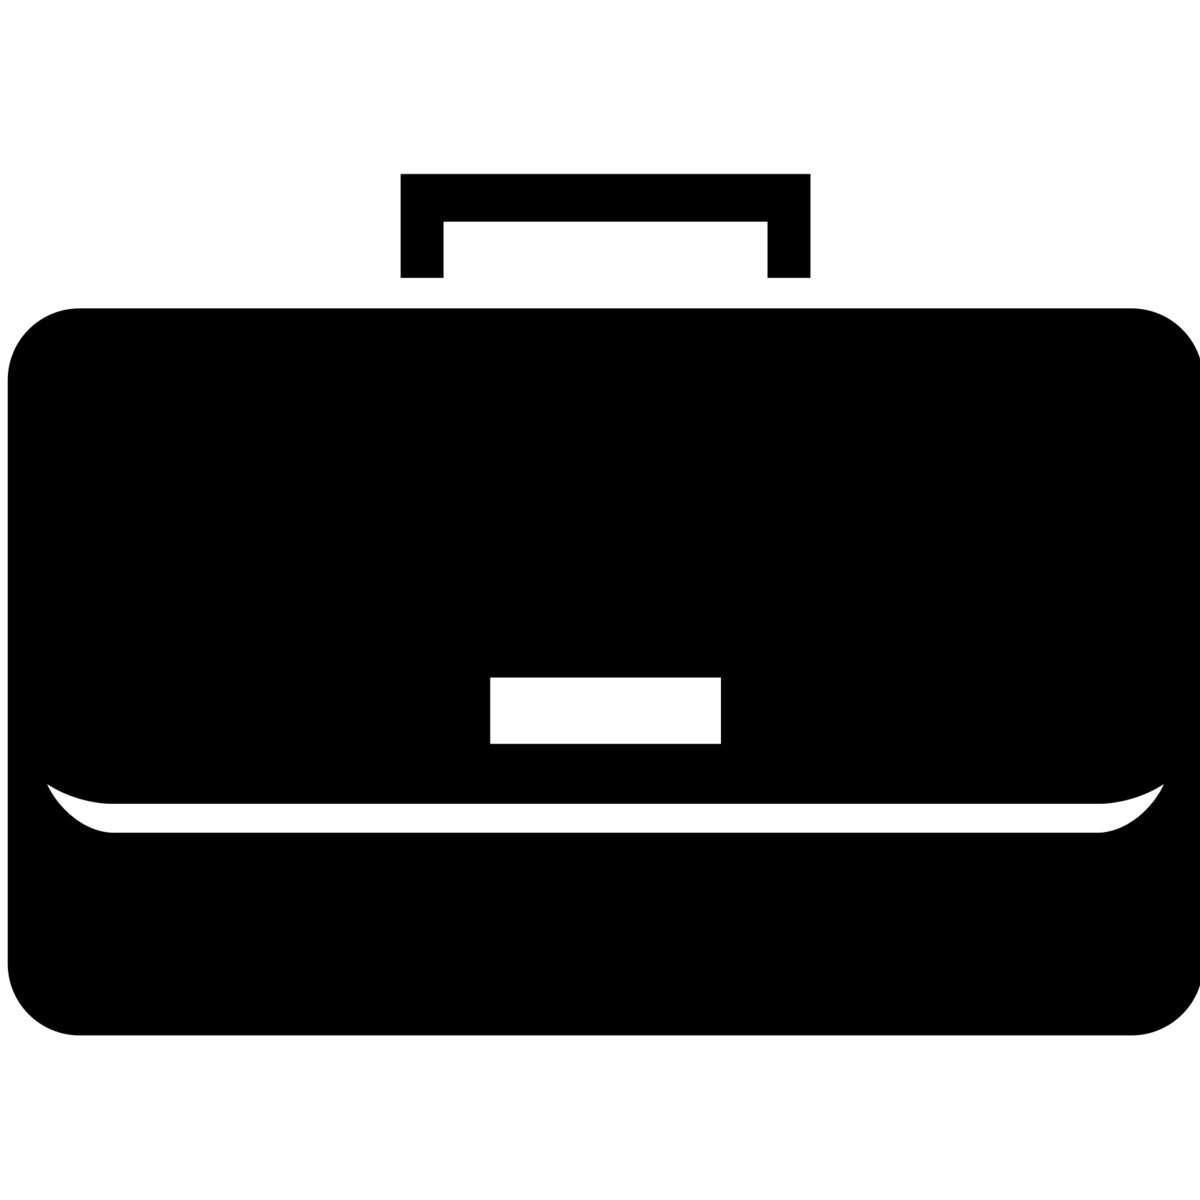 Free Business Briefcase Cliparts, Download Free Clip Art